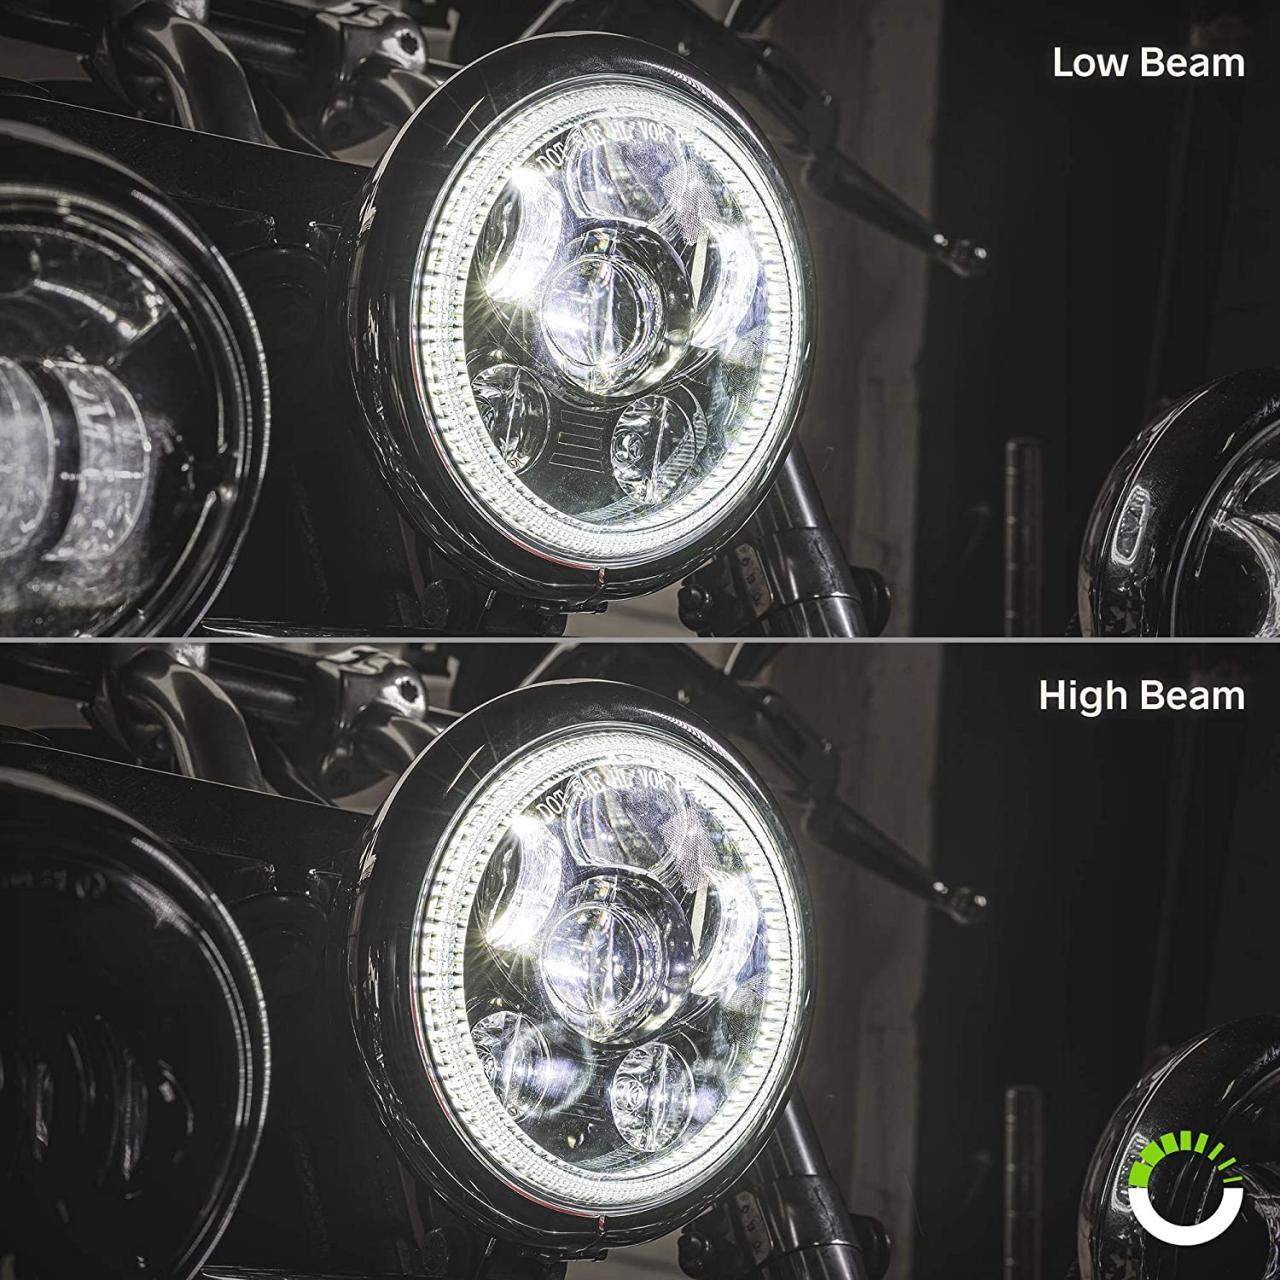 Buy 5.75 (5 3/4) Harley LED Headlight for Harley Davidson [Black-Finish]  [HALO DRL] [DOT Compliant] Round LED Motorcycle Headlight for Dyna Street  Bob Super Wide Glide Low Rider Night Rod Train Softail